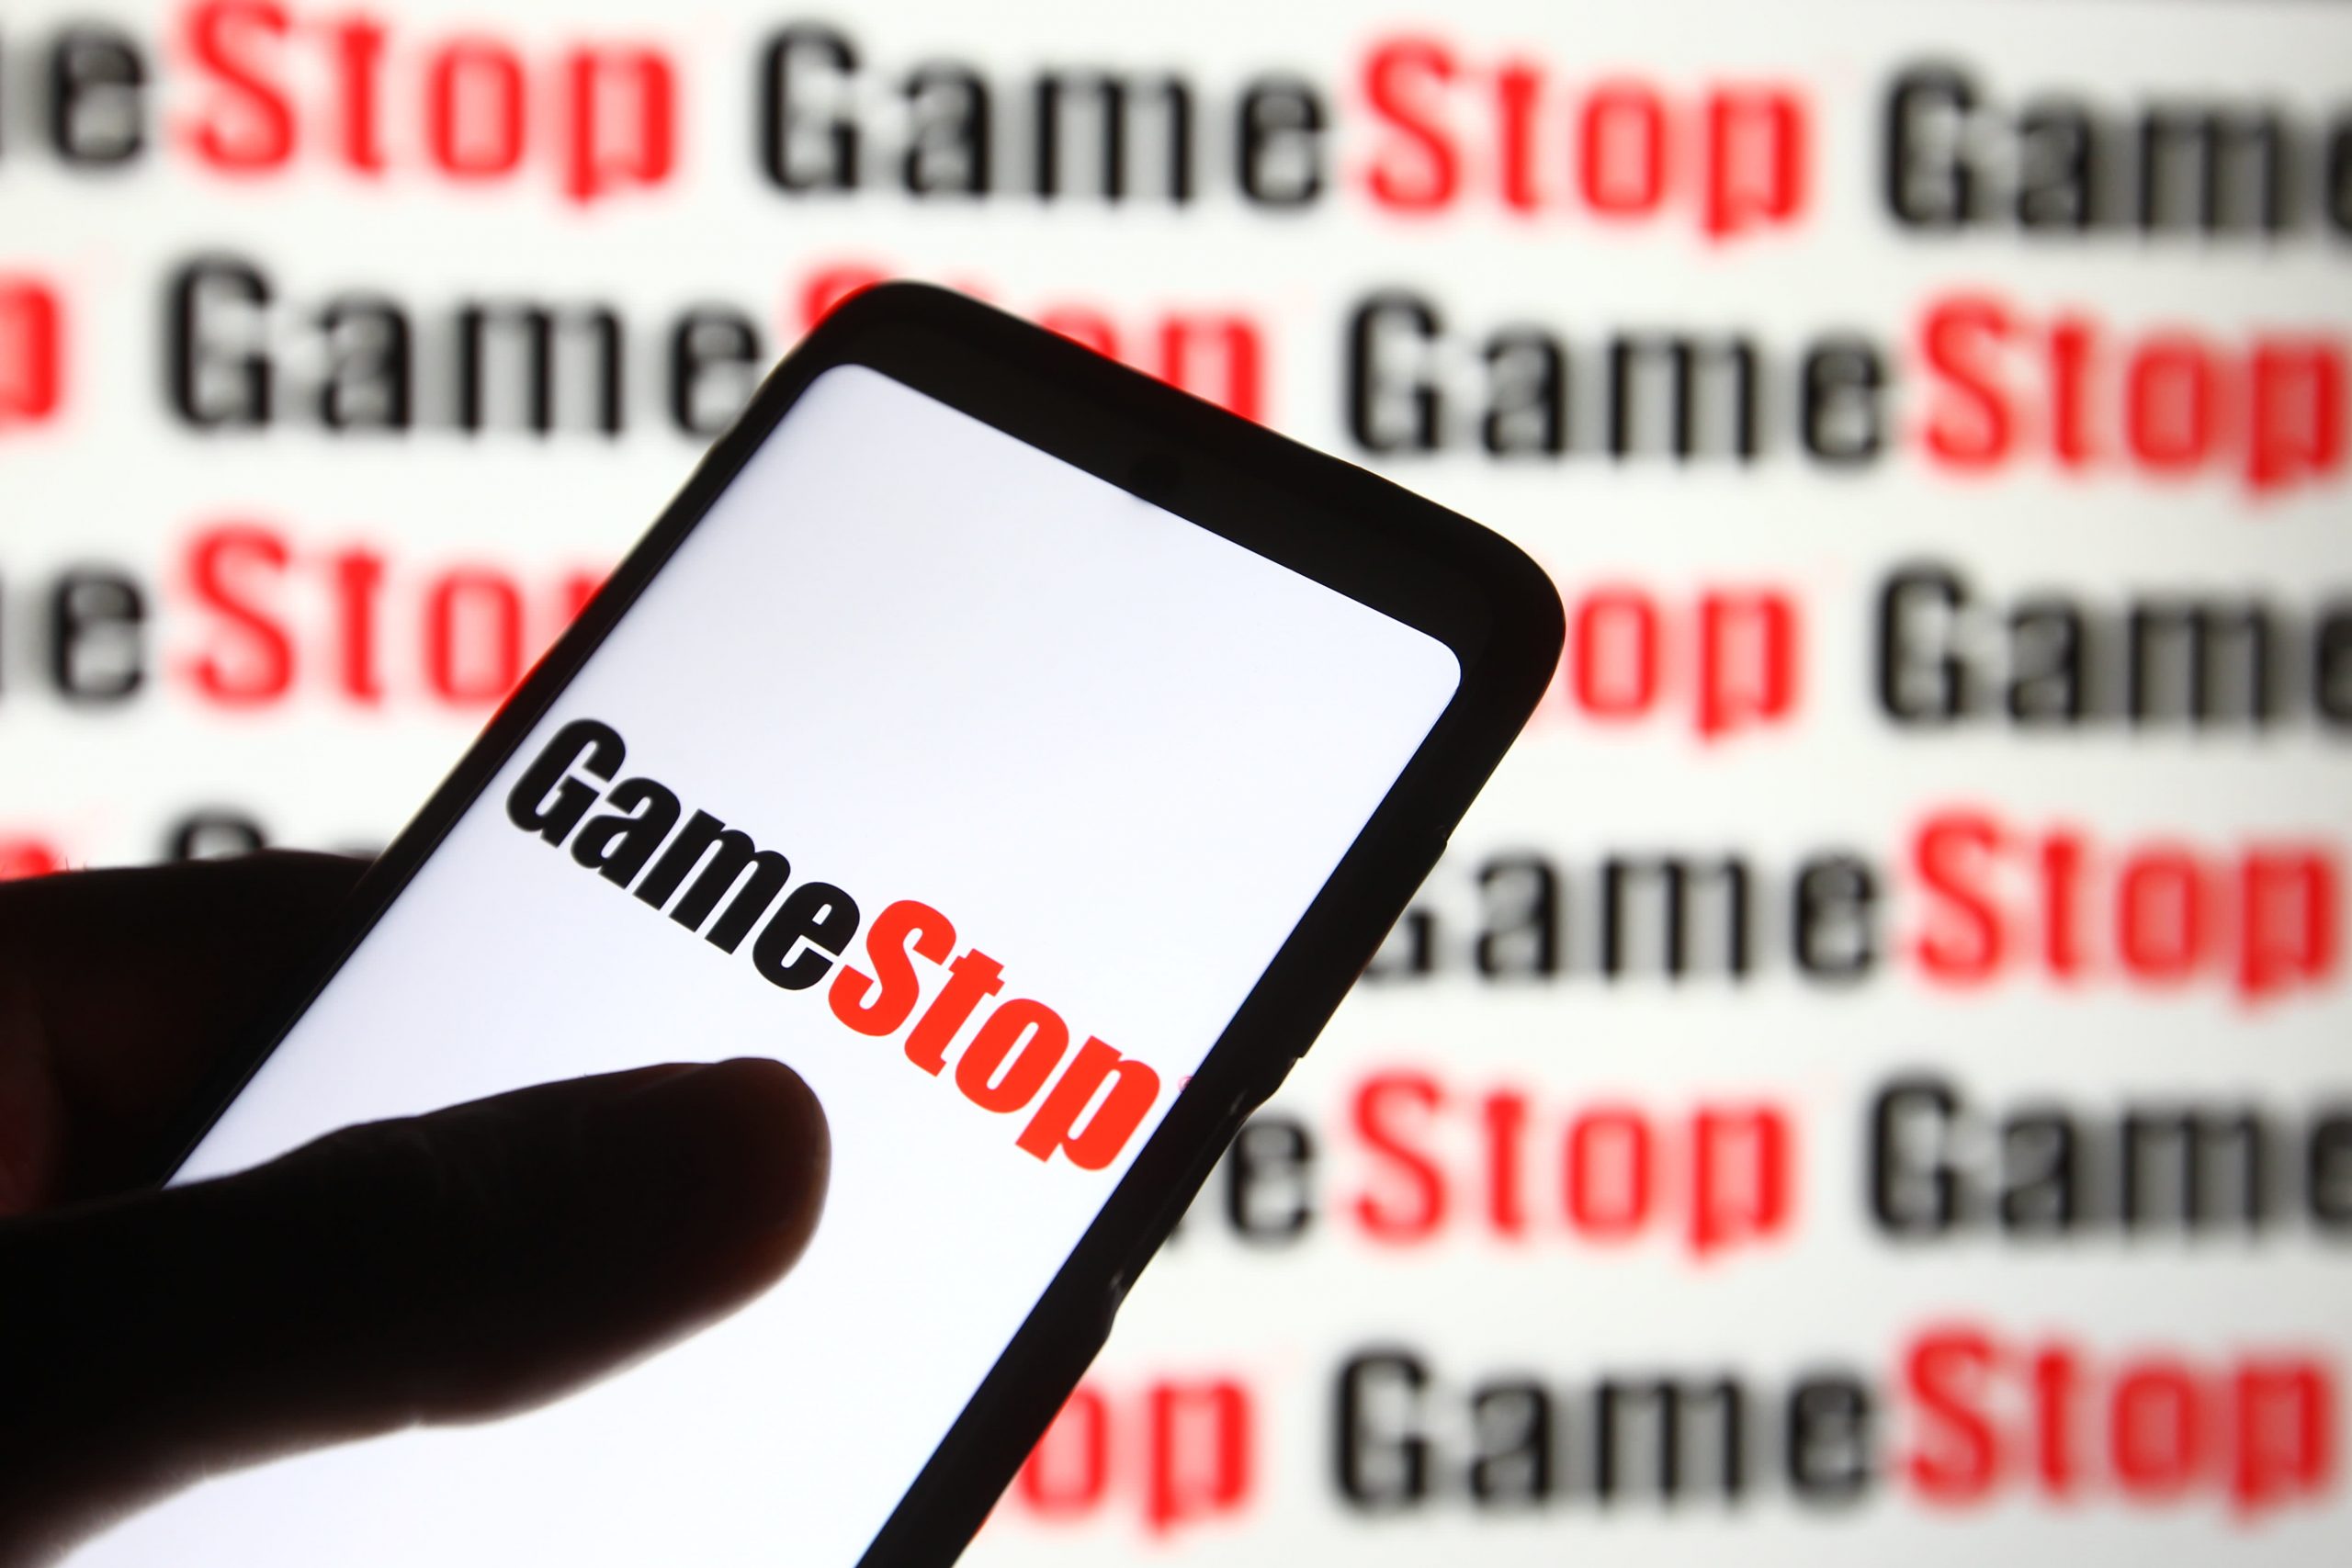 Hedge funds that hunkered down after GameStop are actually lacking out on market good points